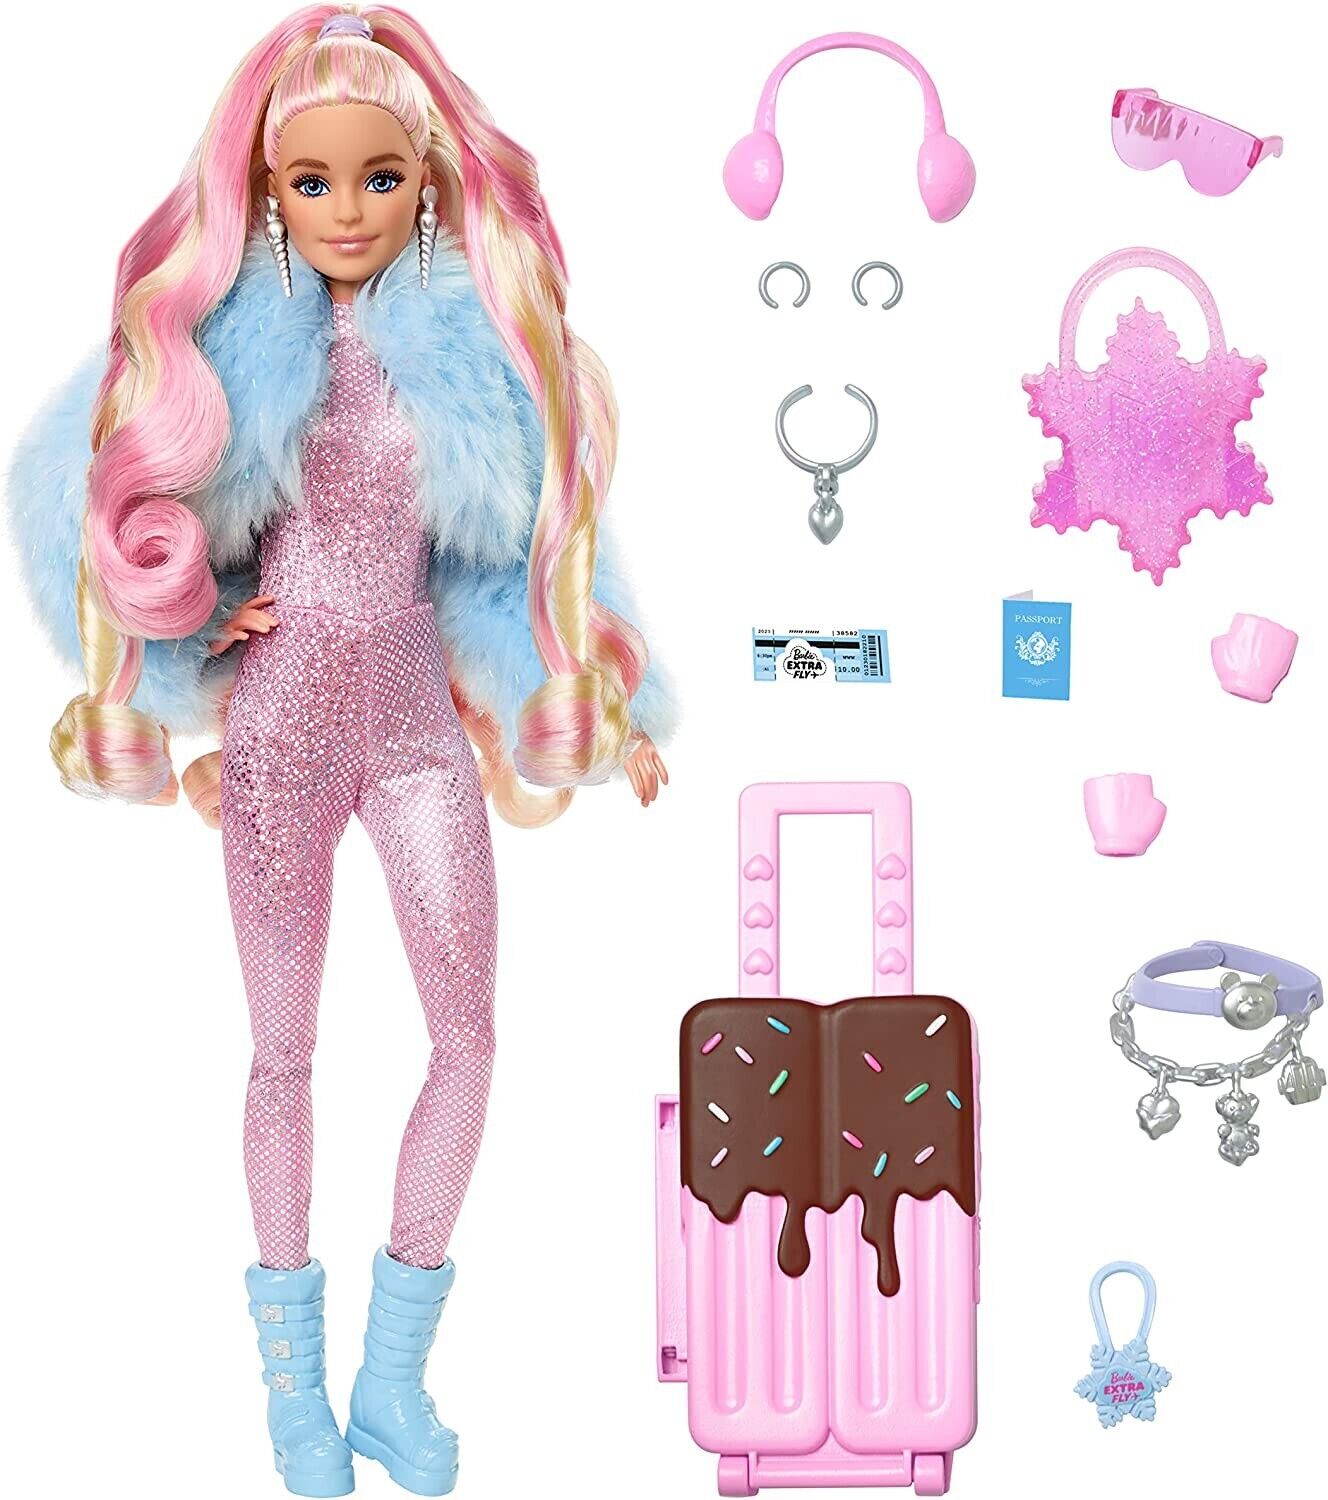 Travel Barbie Doll with Wintery Snow Fashion, Barbie Extra Fly, Sparkly Pink